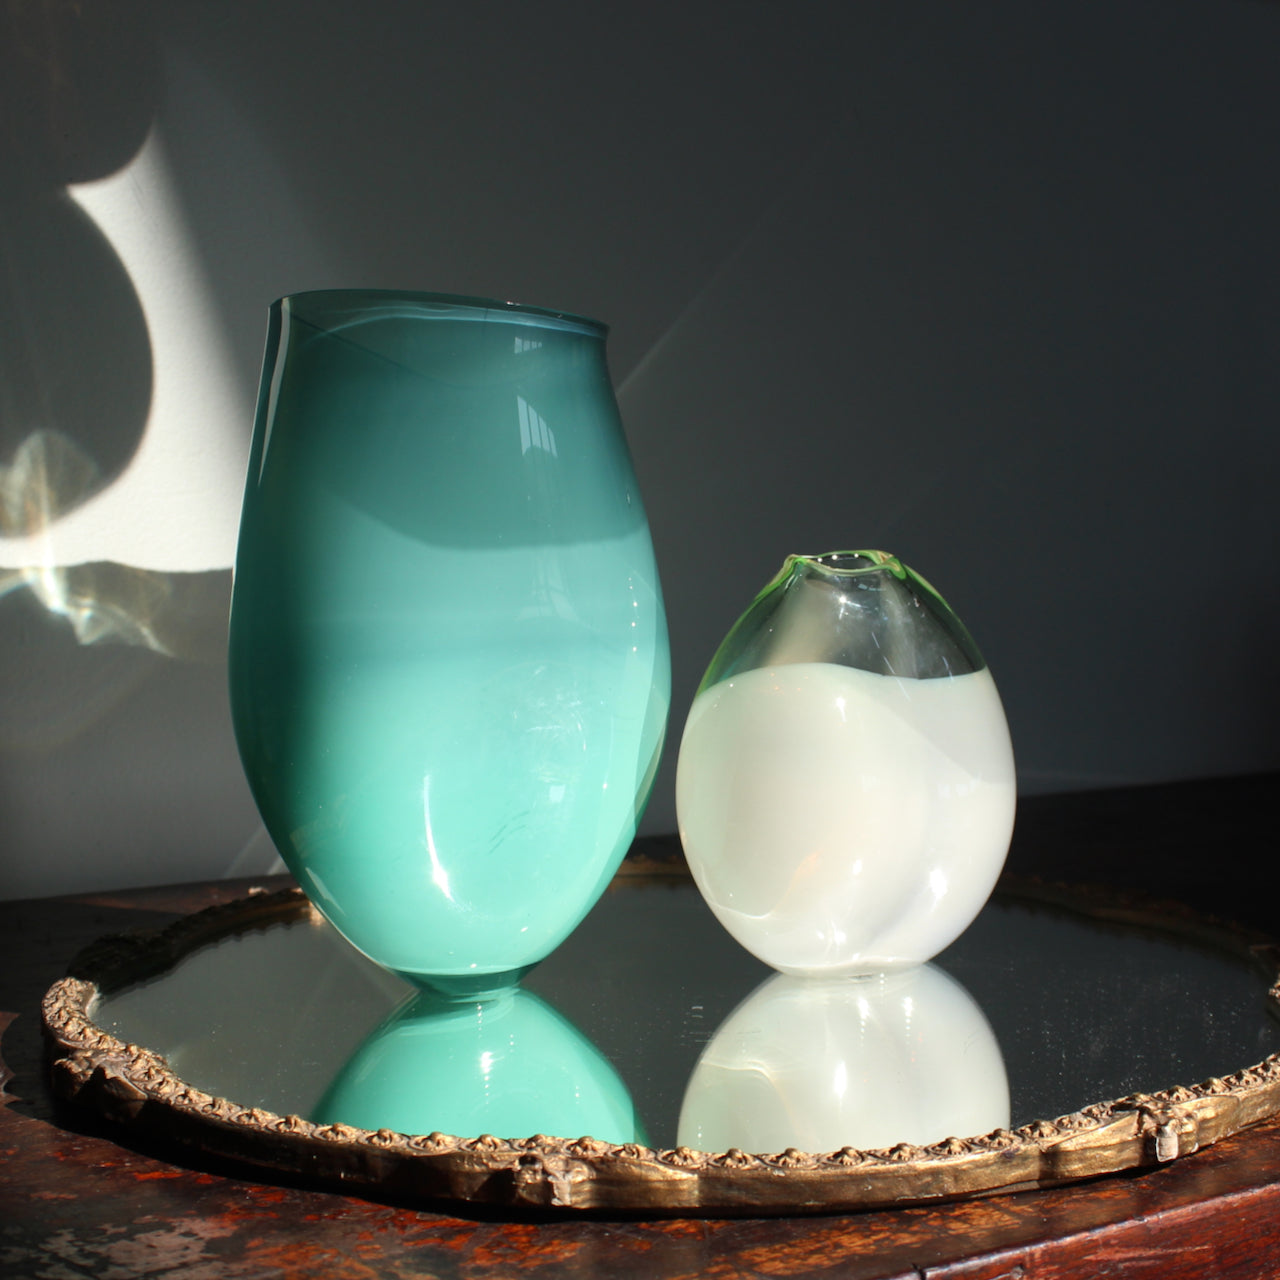 two glass vessels by glass artist Michele Oberdieck's one is in turquoise and the other pale green